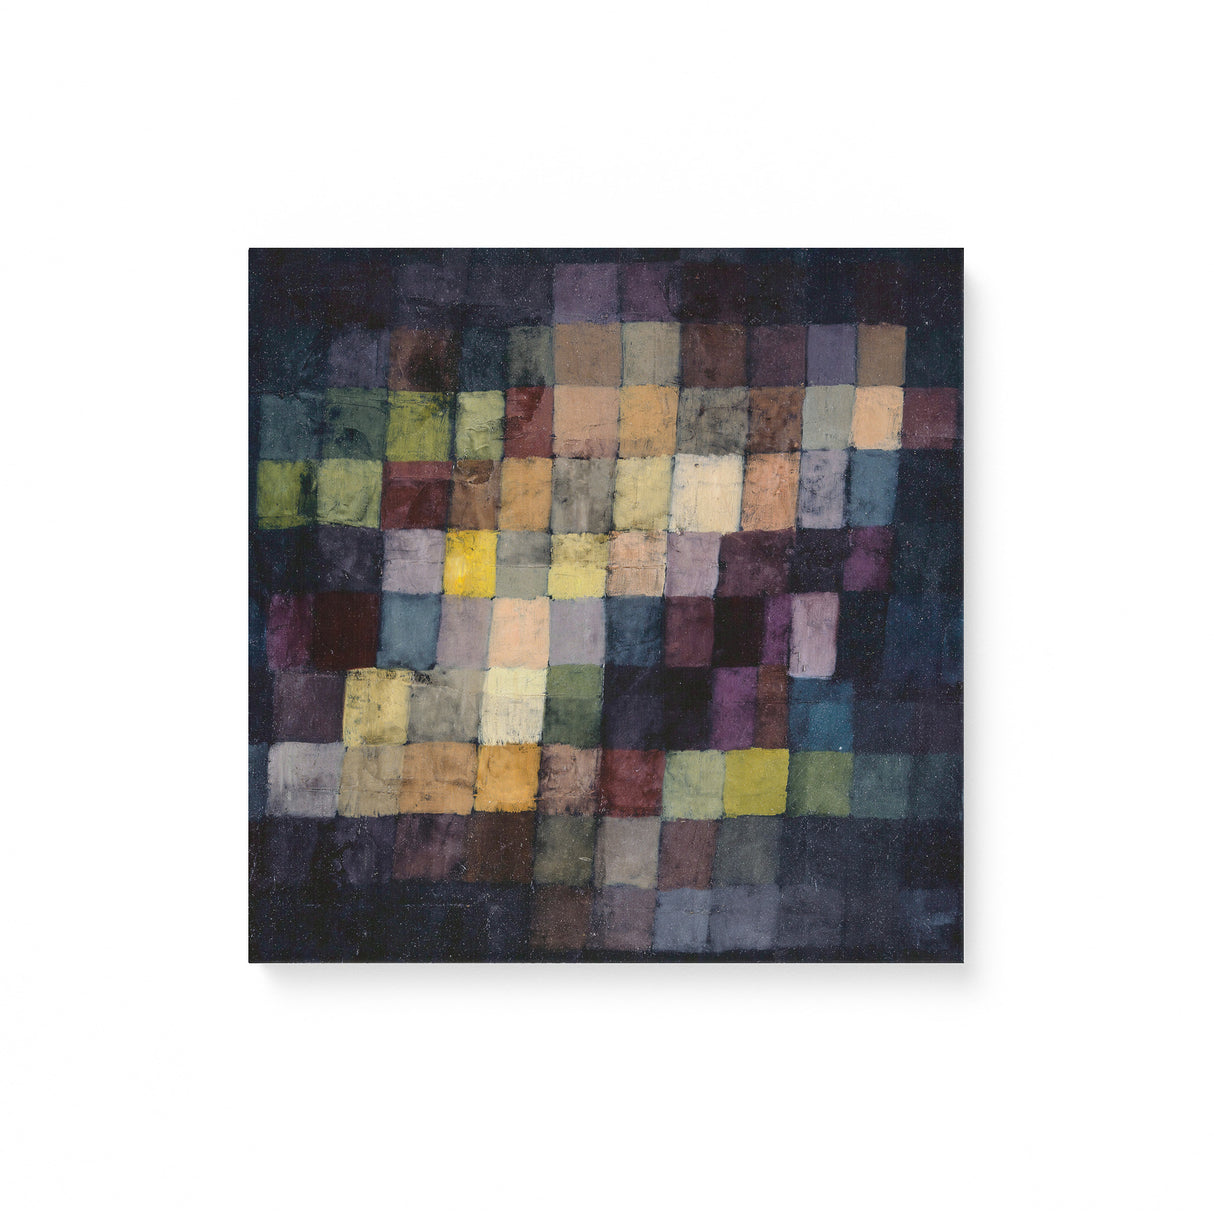 "Old Sound" Canvas Wall Art by Paul Klee (1925) Canvas Wall Art Sckribbles 16x16  